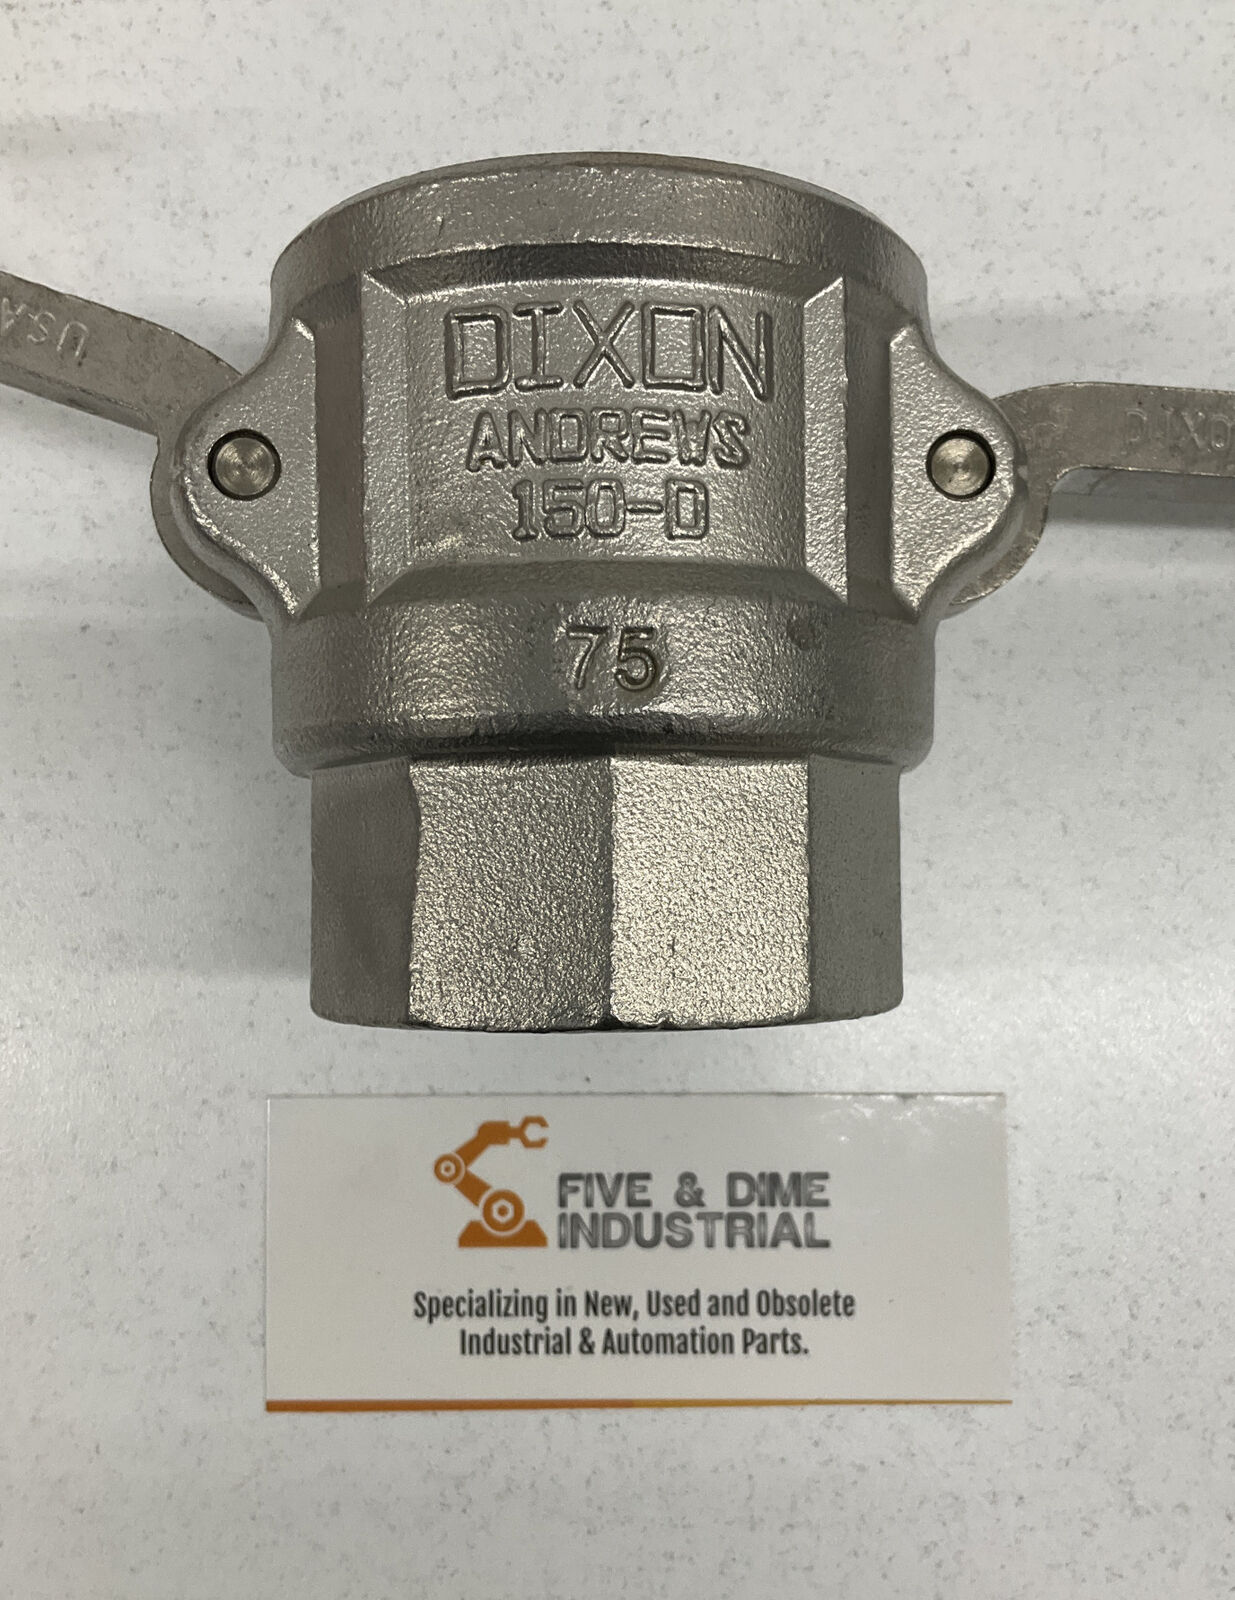 Dixon Andrews 1-1/2" Stainless Steel Coupler DXV-150-DL-SS  (RE241) - 0